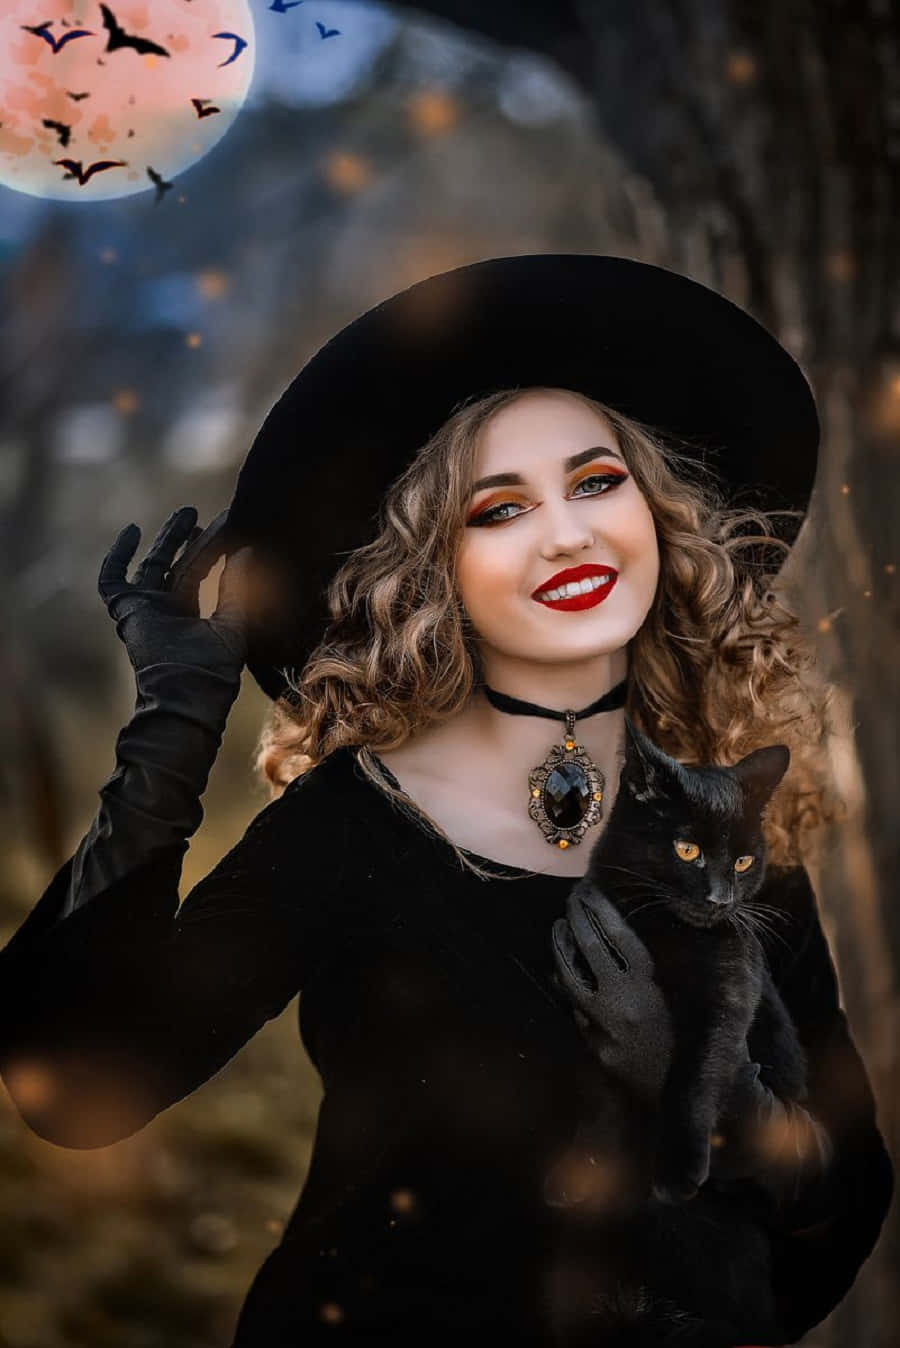 Spooky yet stylish witch costume with a classic hat Wallpaper